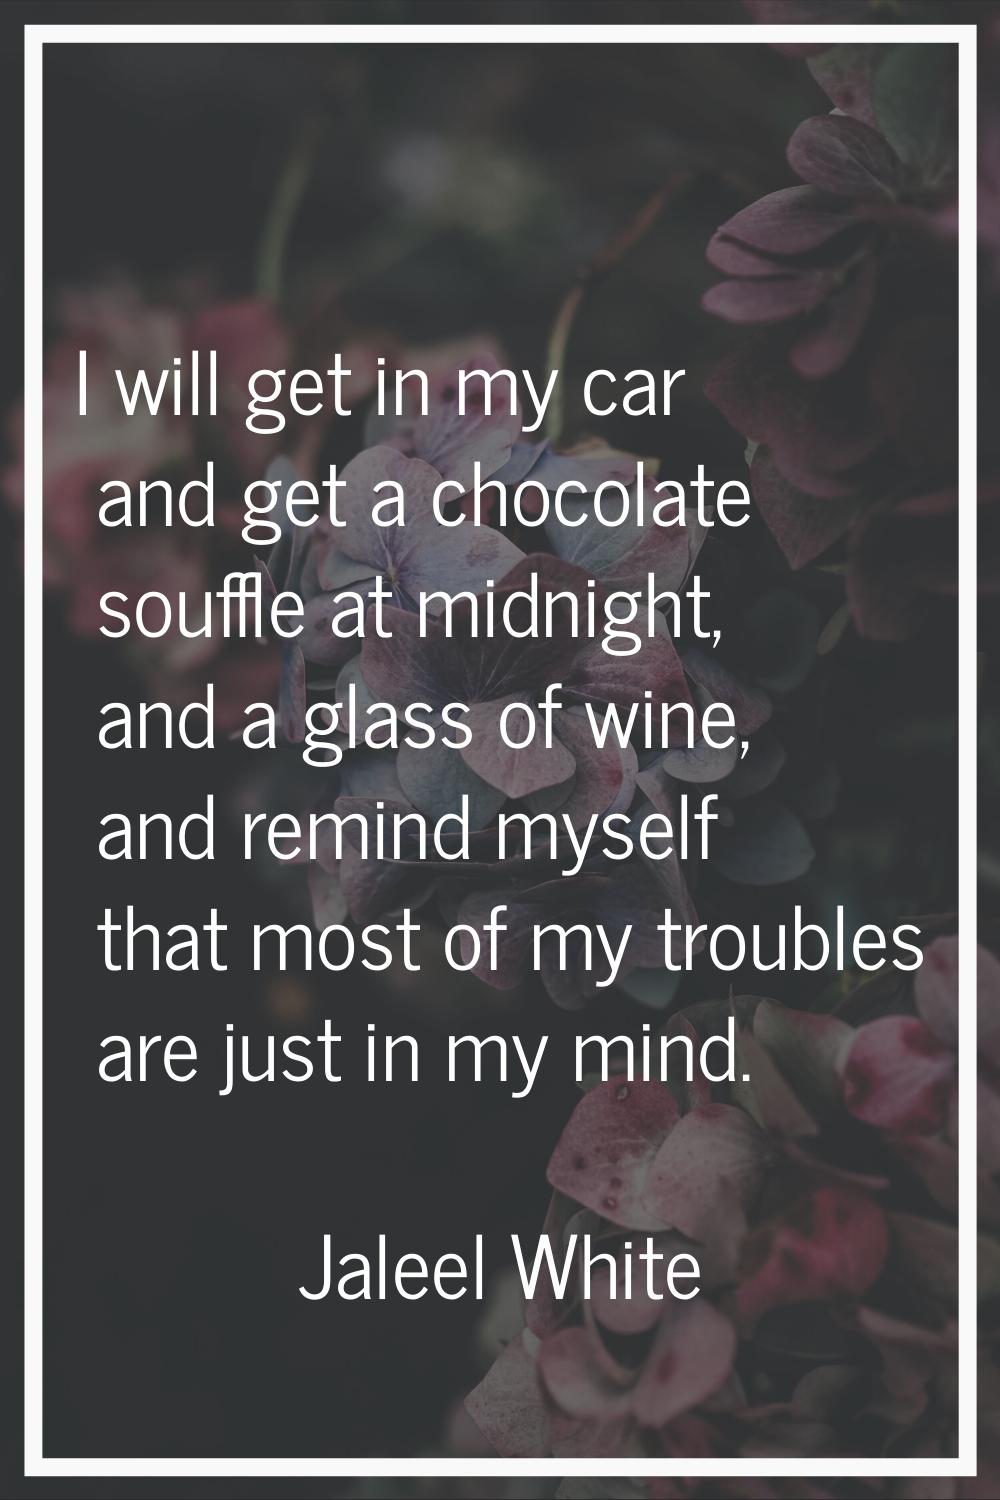 I will get in my car and get a chocolate souffle at midnight, and a glass of wine, and remind mysel